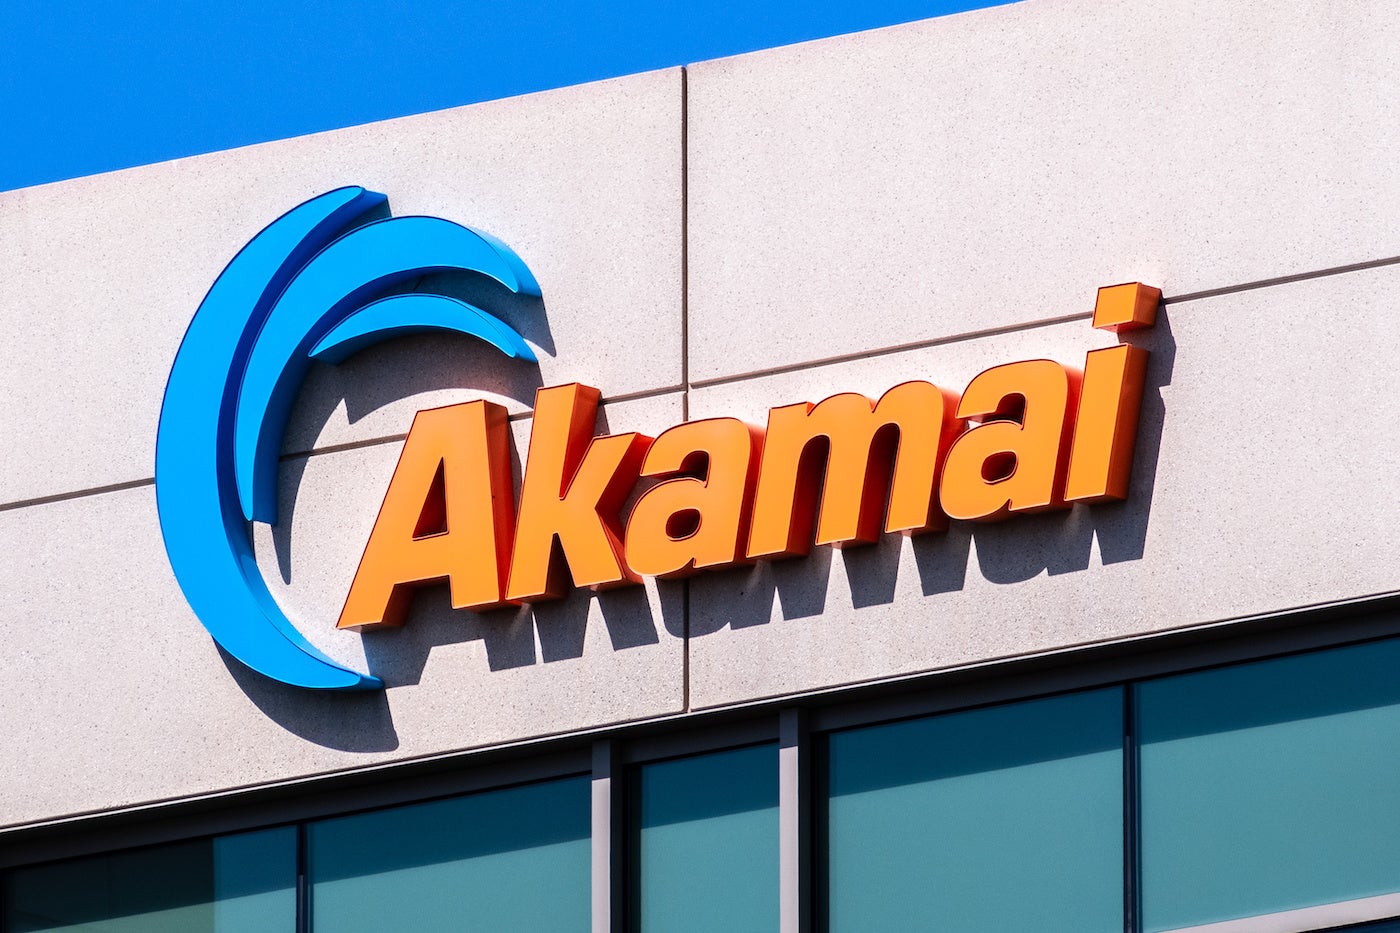 Top of Akamai building with Akamai logo in blue and orage